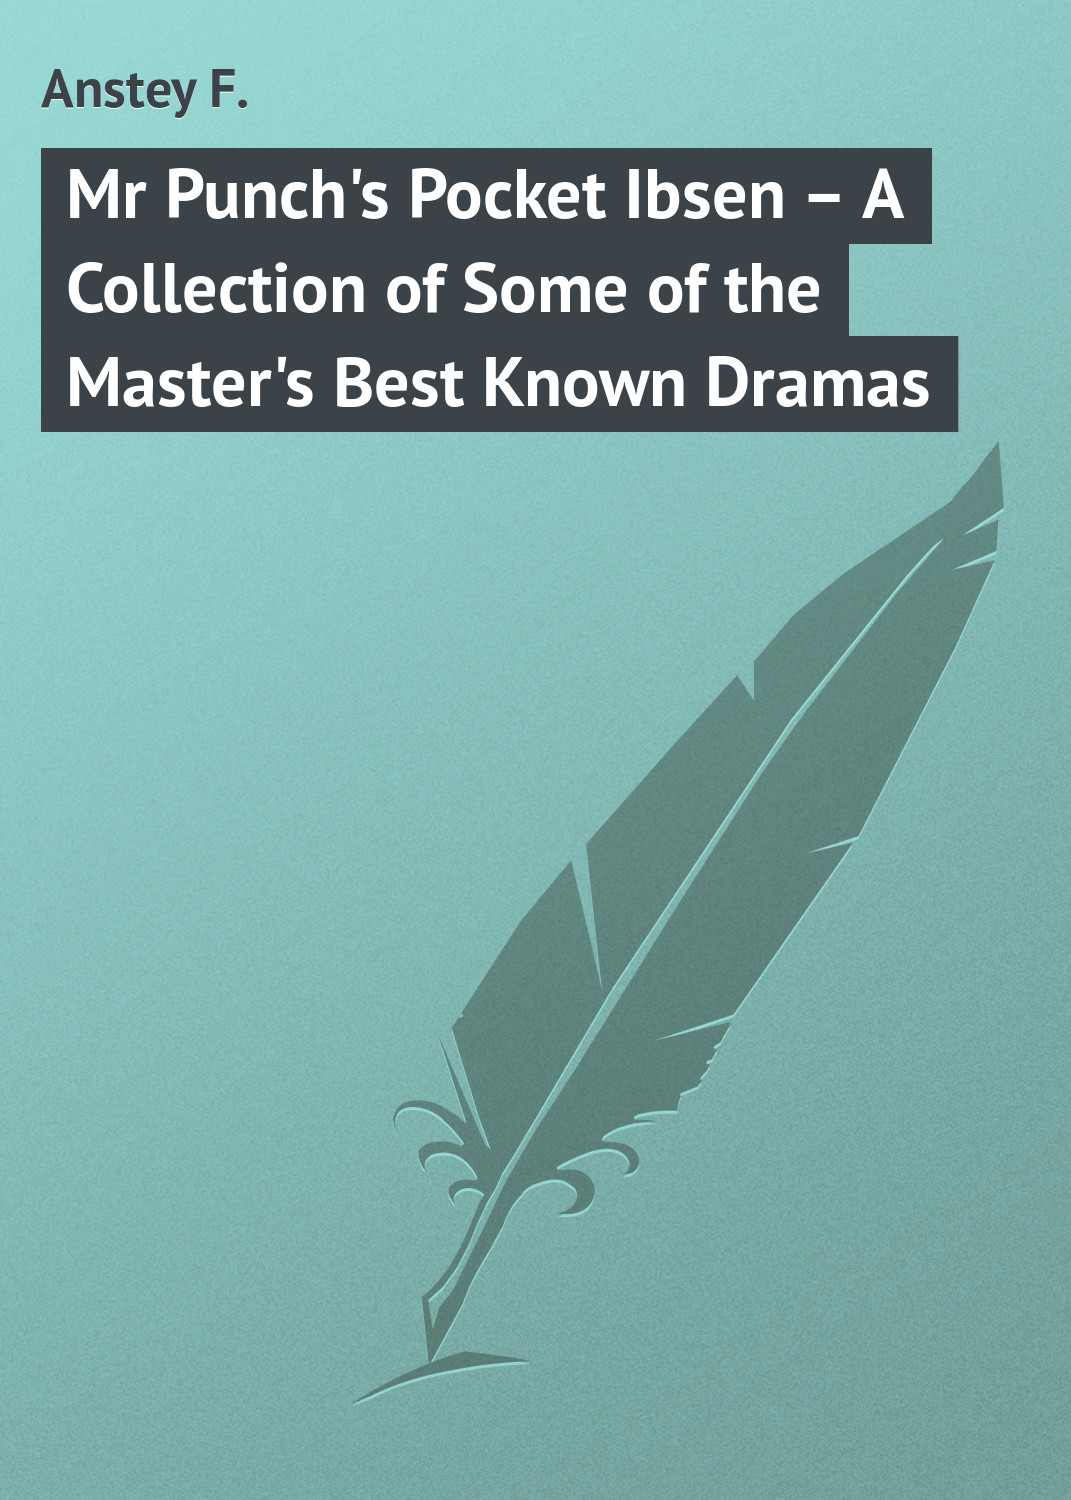 Anstey F. Mr Punch's Pocket Ibsen – A Collection of Some of the Master's Best Known Dramas